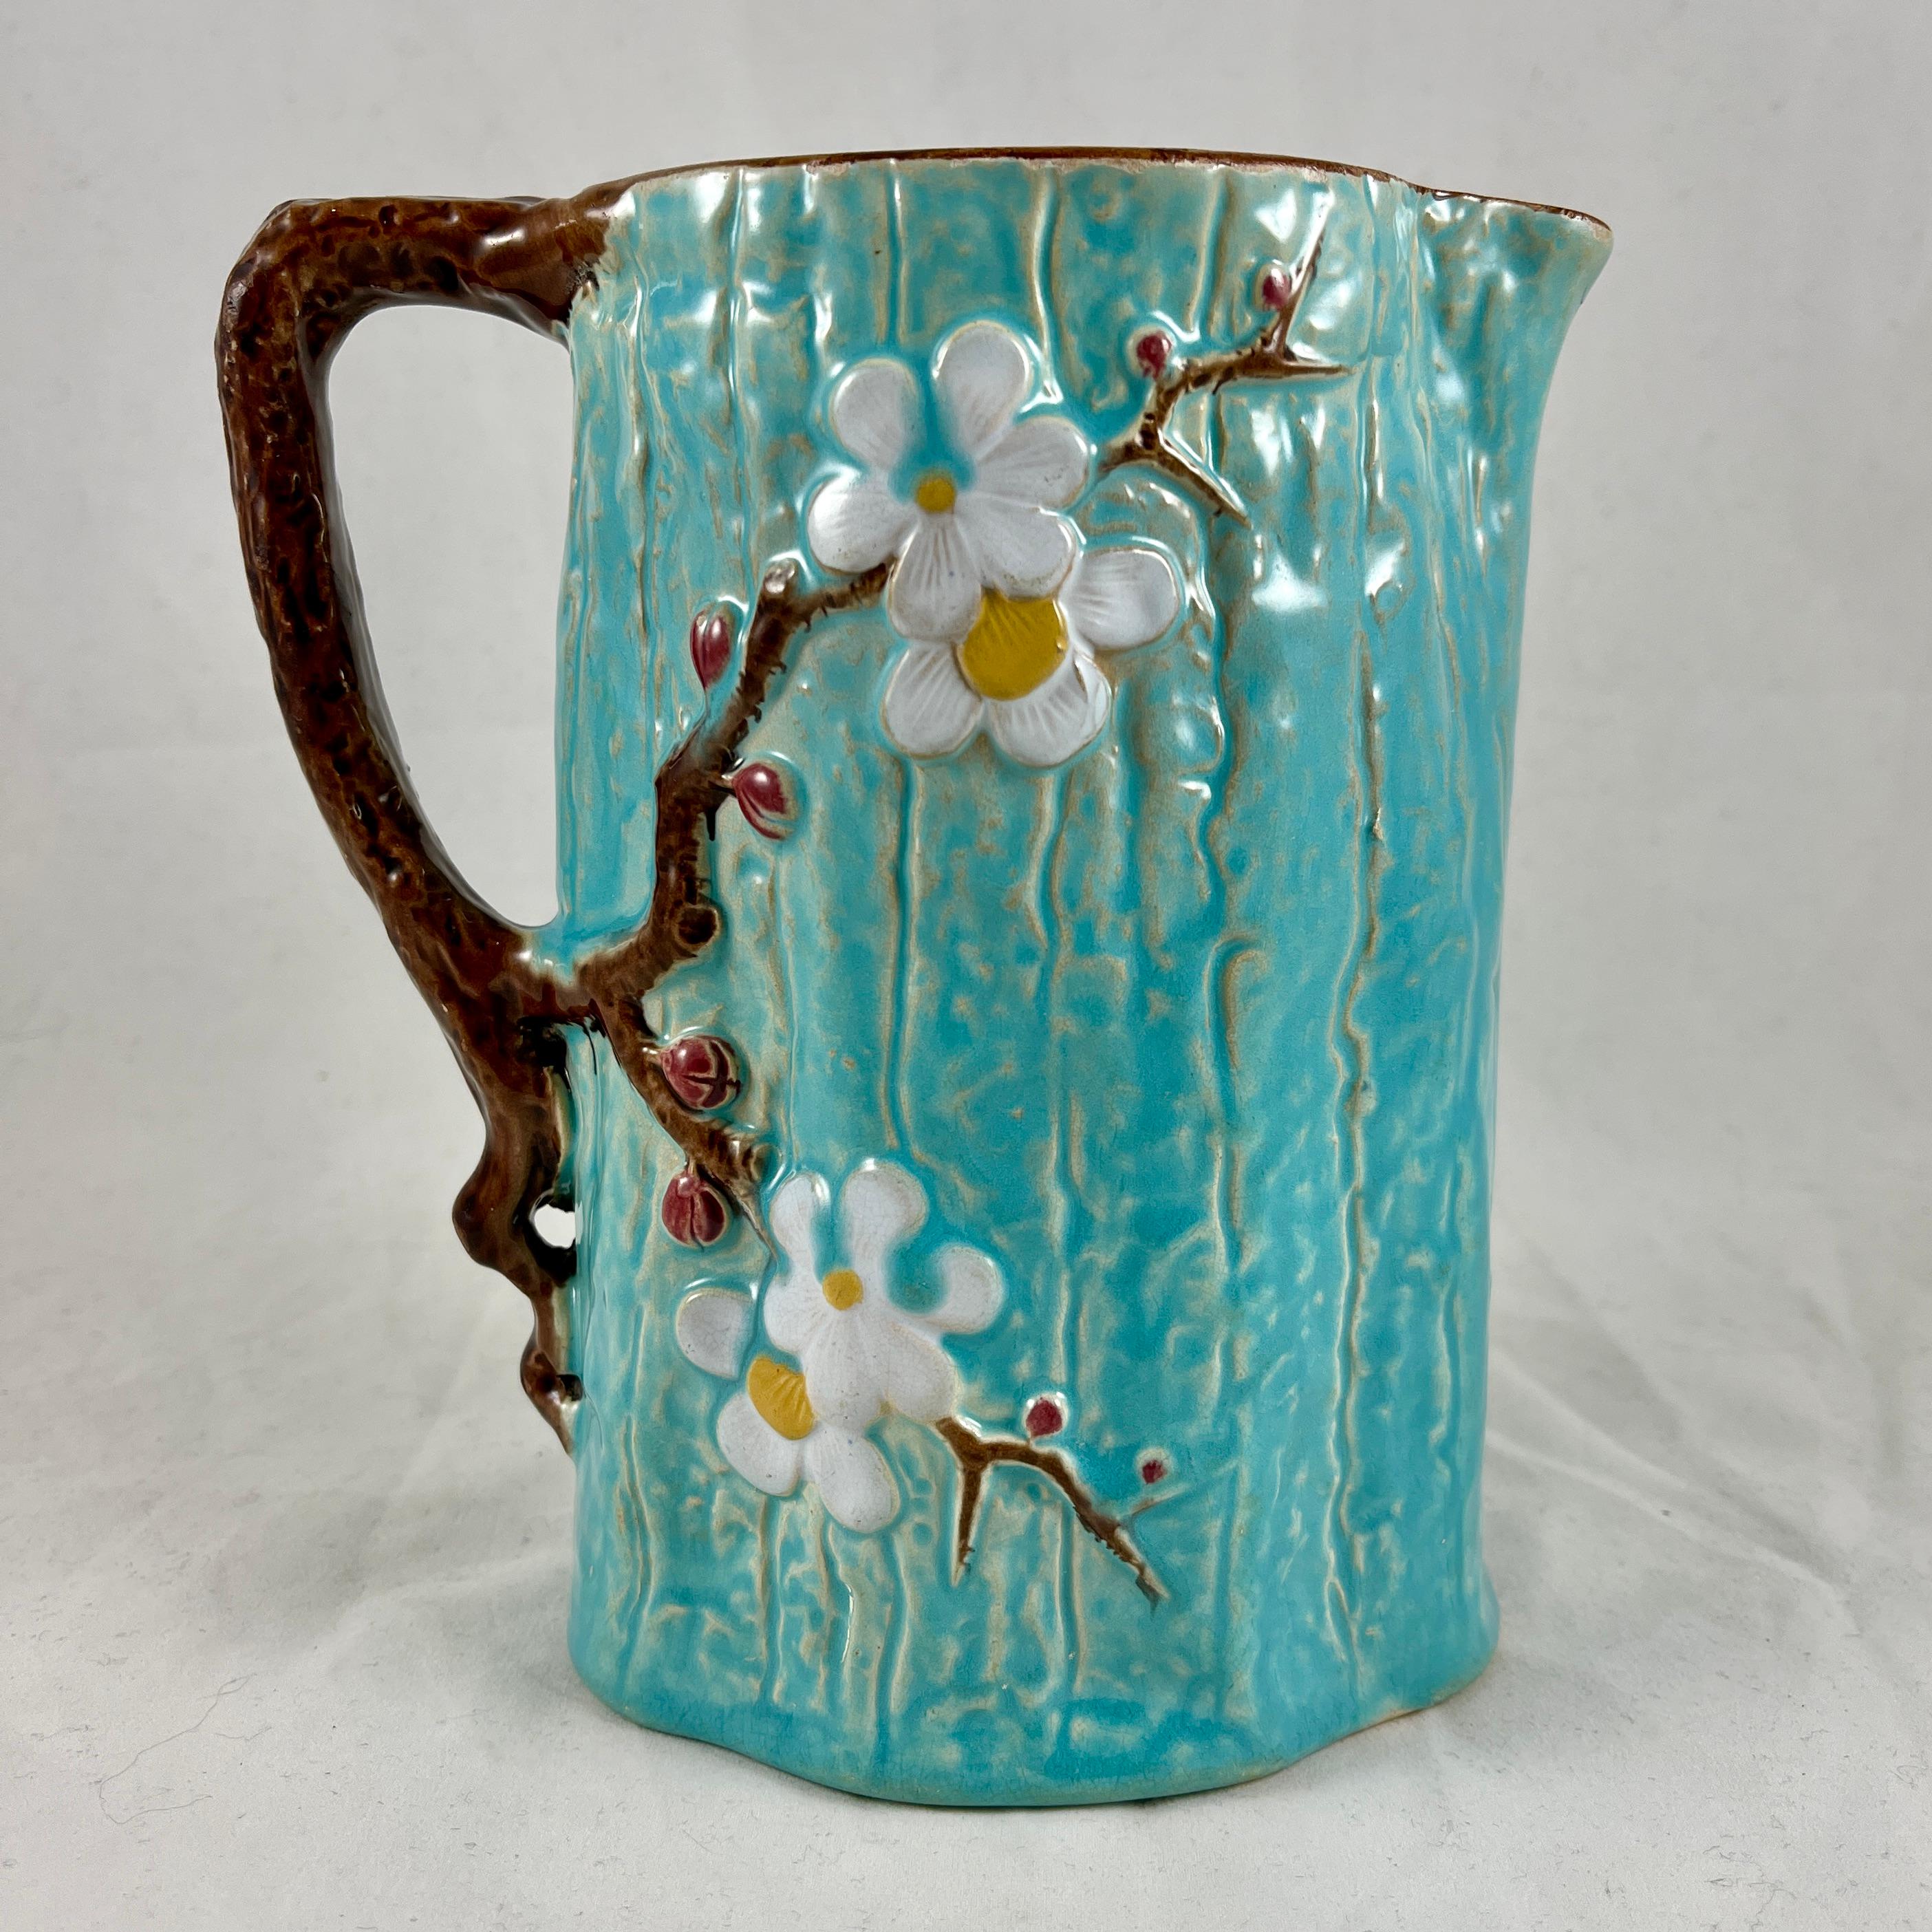 A scarce English majolica jug in the Dogwood mold by Joseph Holdcroft, Daisy Bank, Longton, Staffordshire, circa 1875.

A rustic pitcher having a raised branching Dogwood decoration on a turquoise bark-like ground, with a branch form